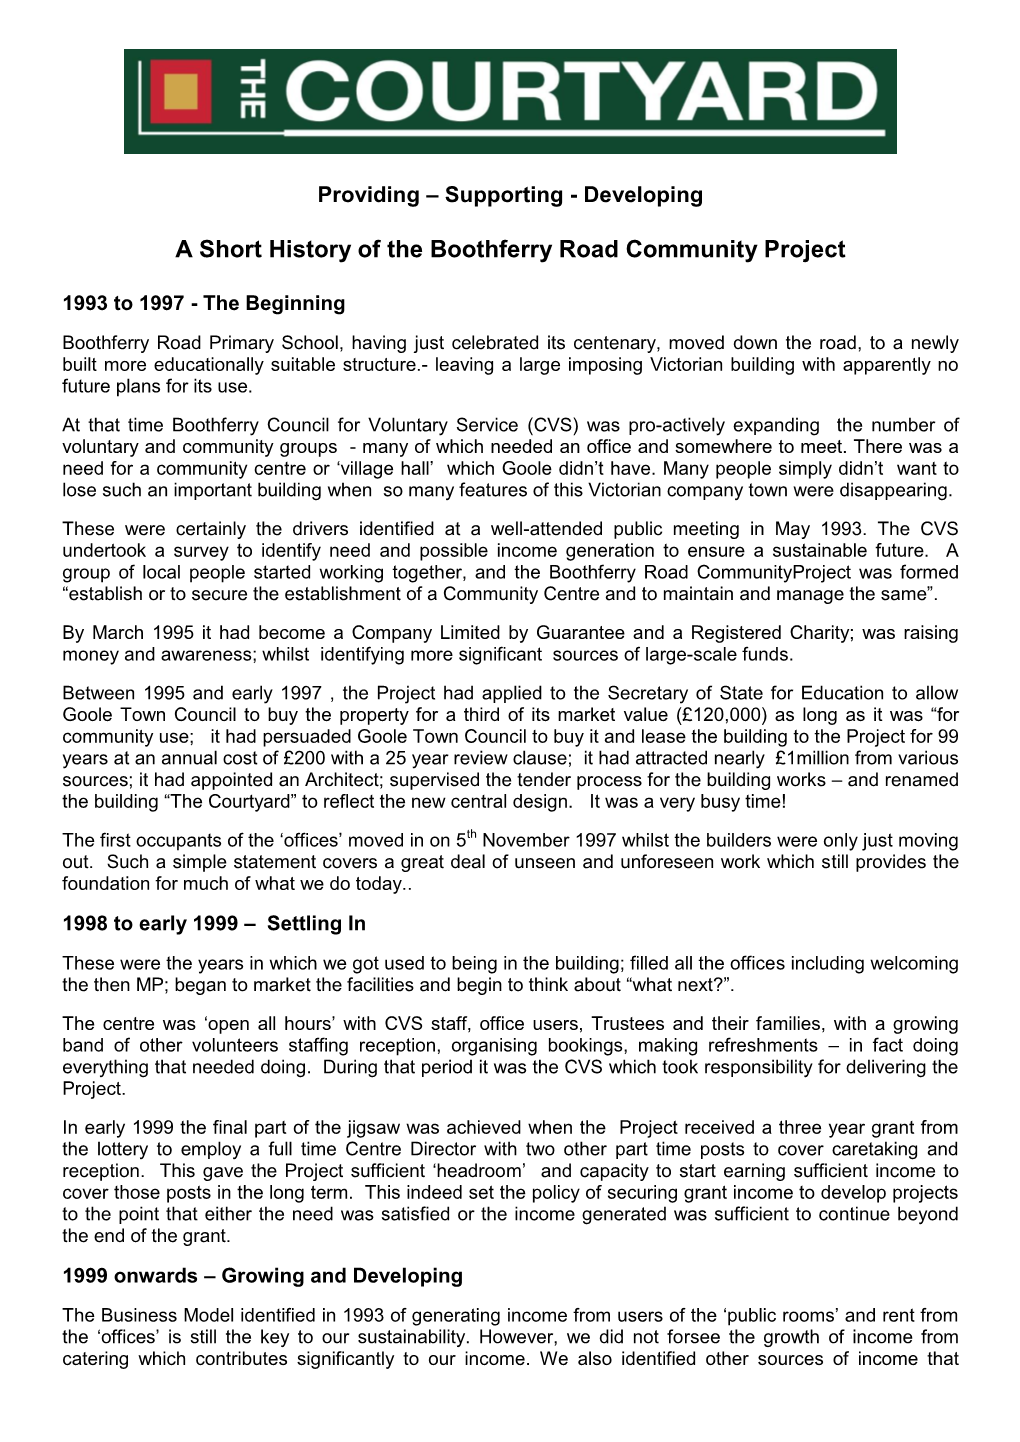 A Short History of the Boothferry Road Community Project